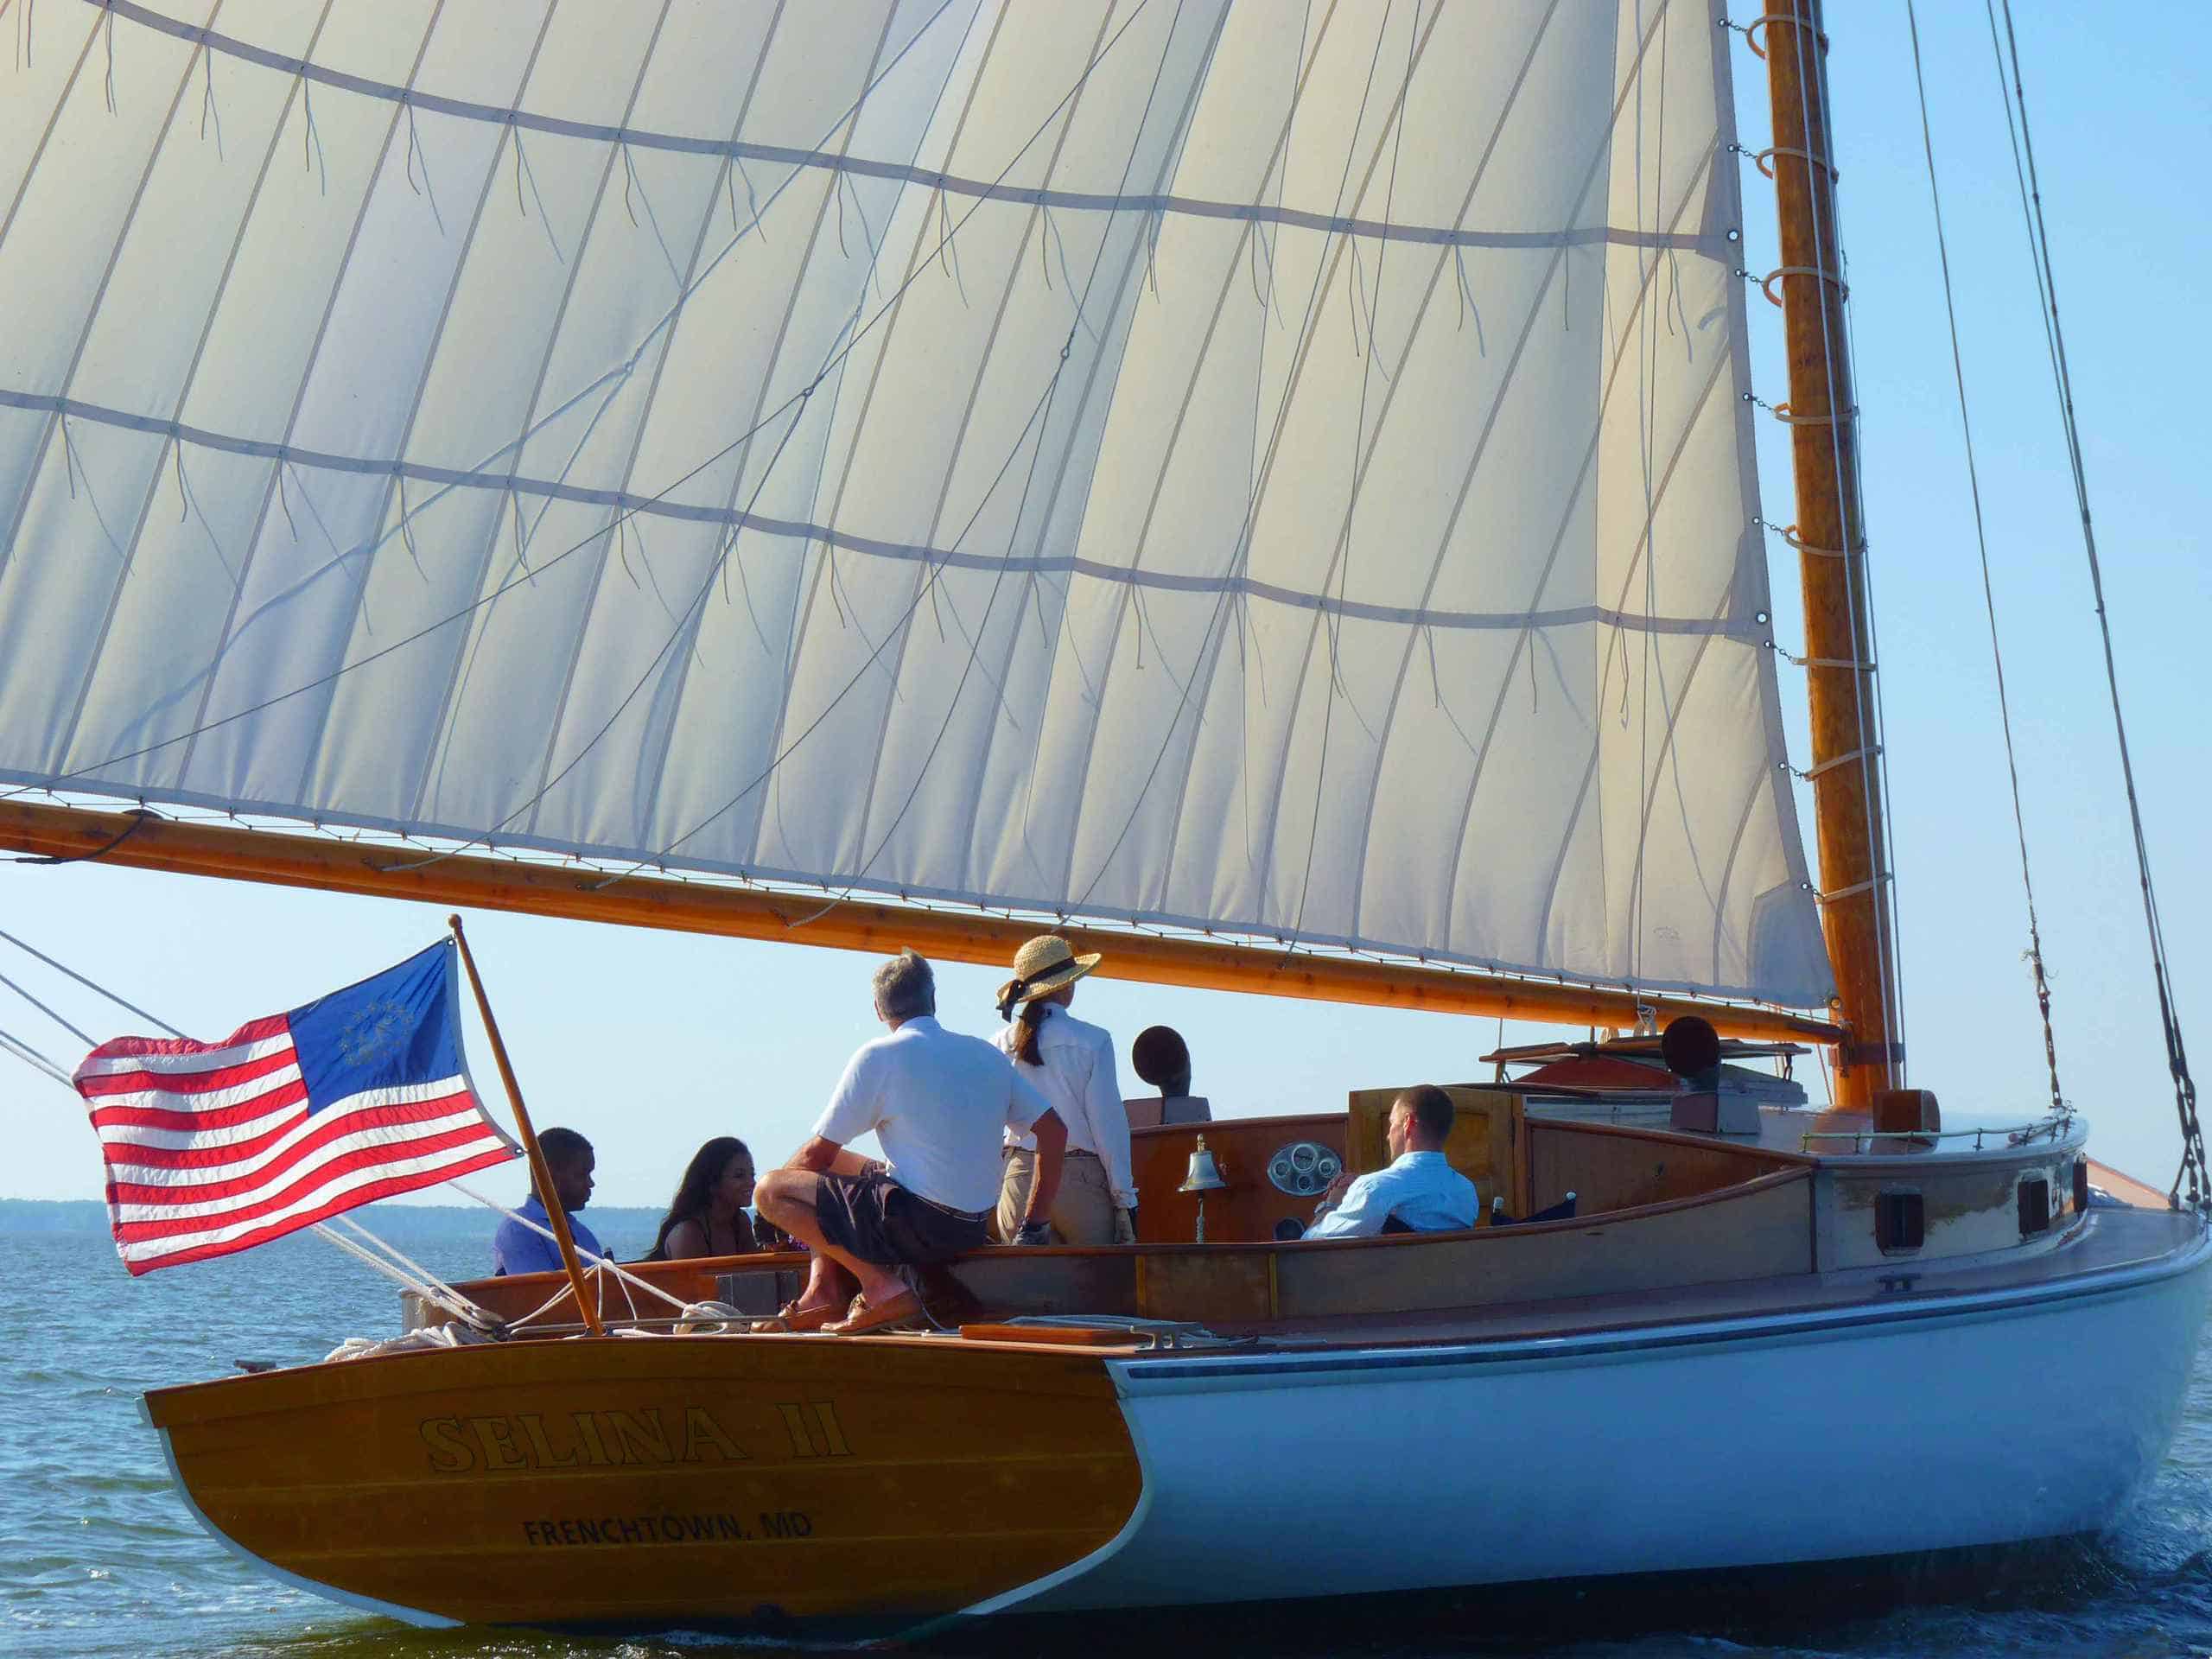 sail selina II st michaels md full sails up ensign in breeze boat tour chesapeake bay small